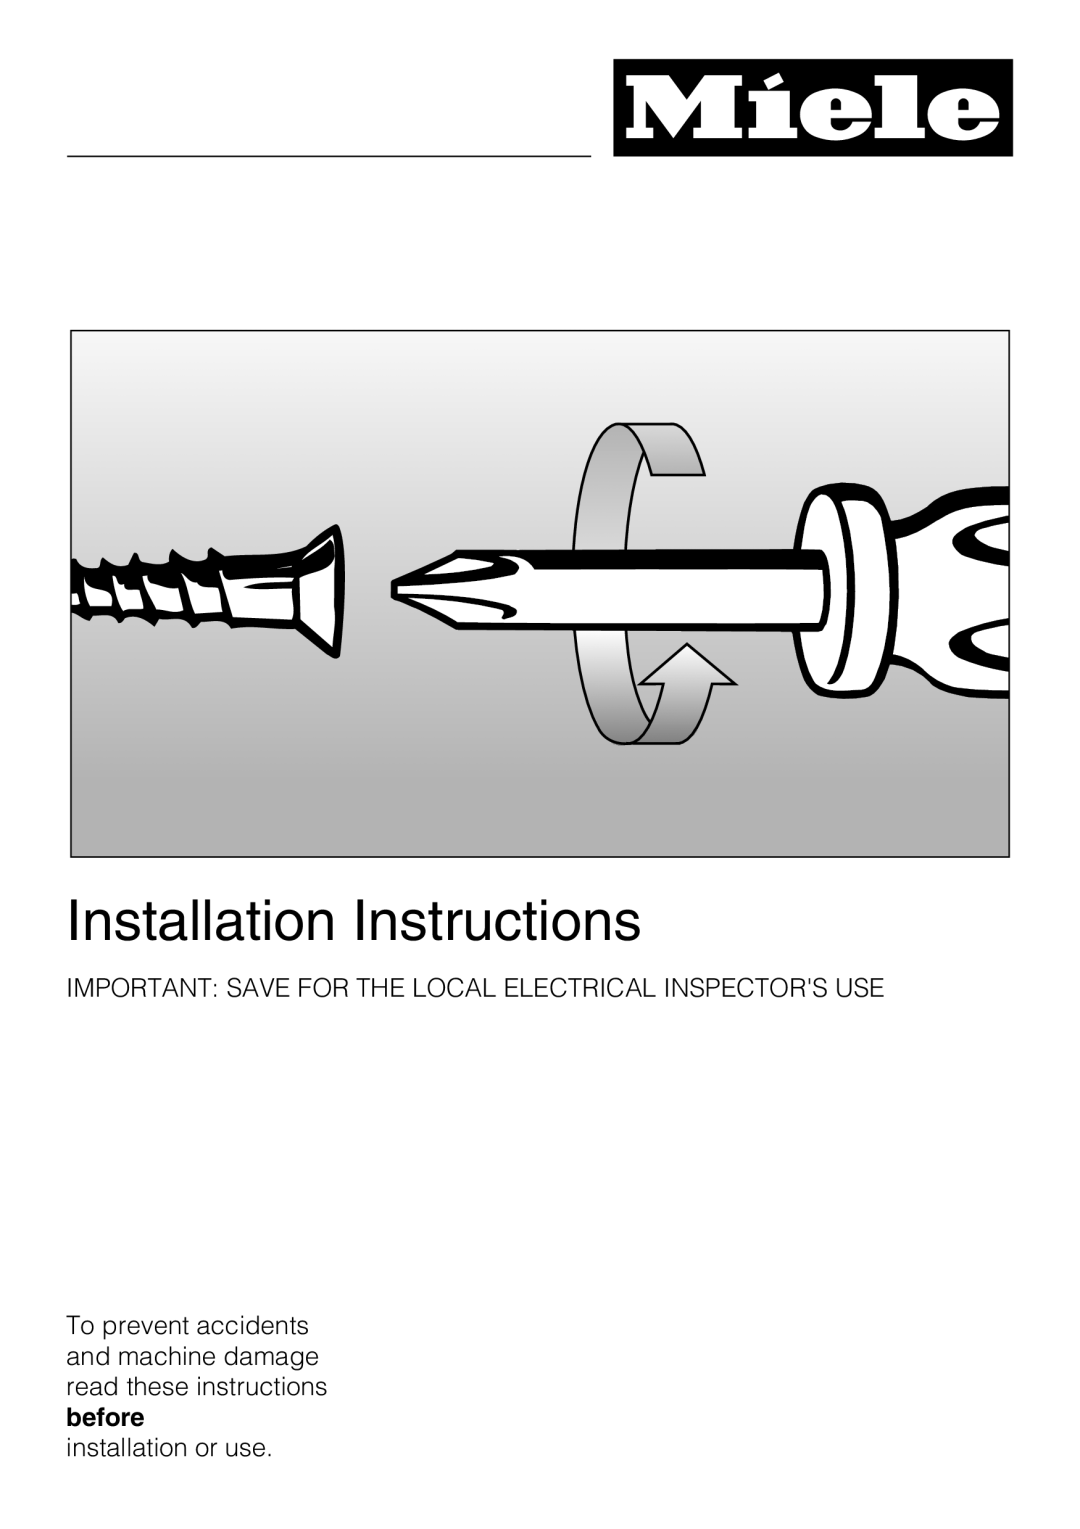 Miele CS1012 Installation Instructions, Important Save For The Local Electrical Inspectors Use, installation or use 